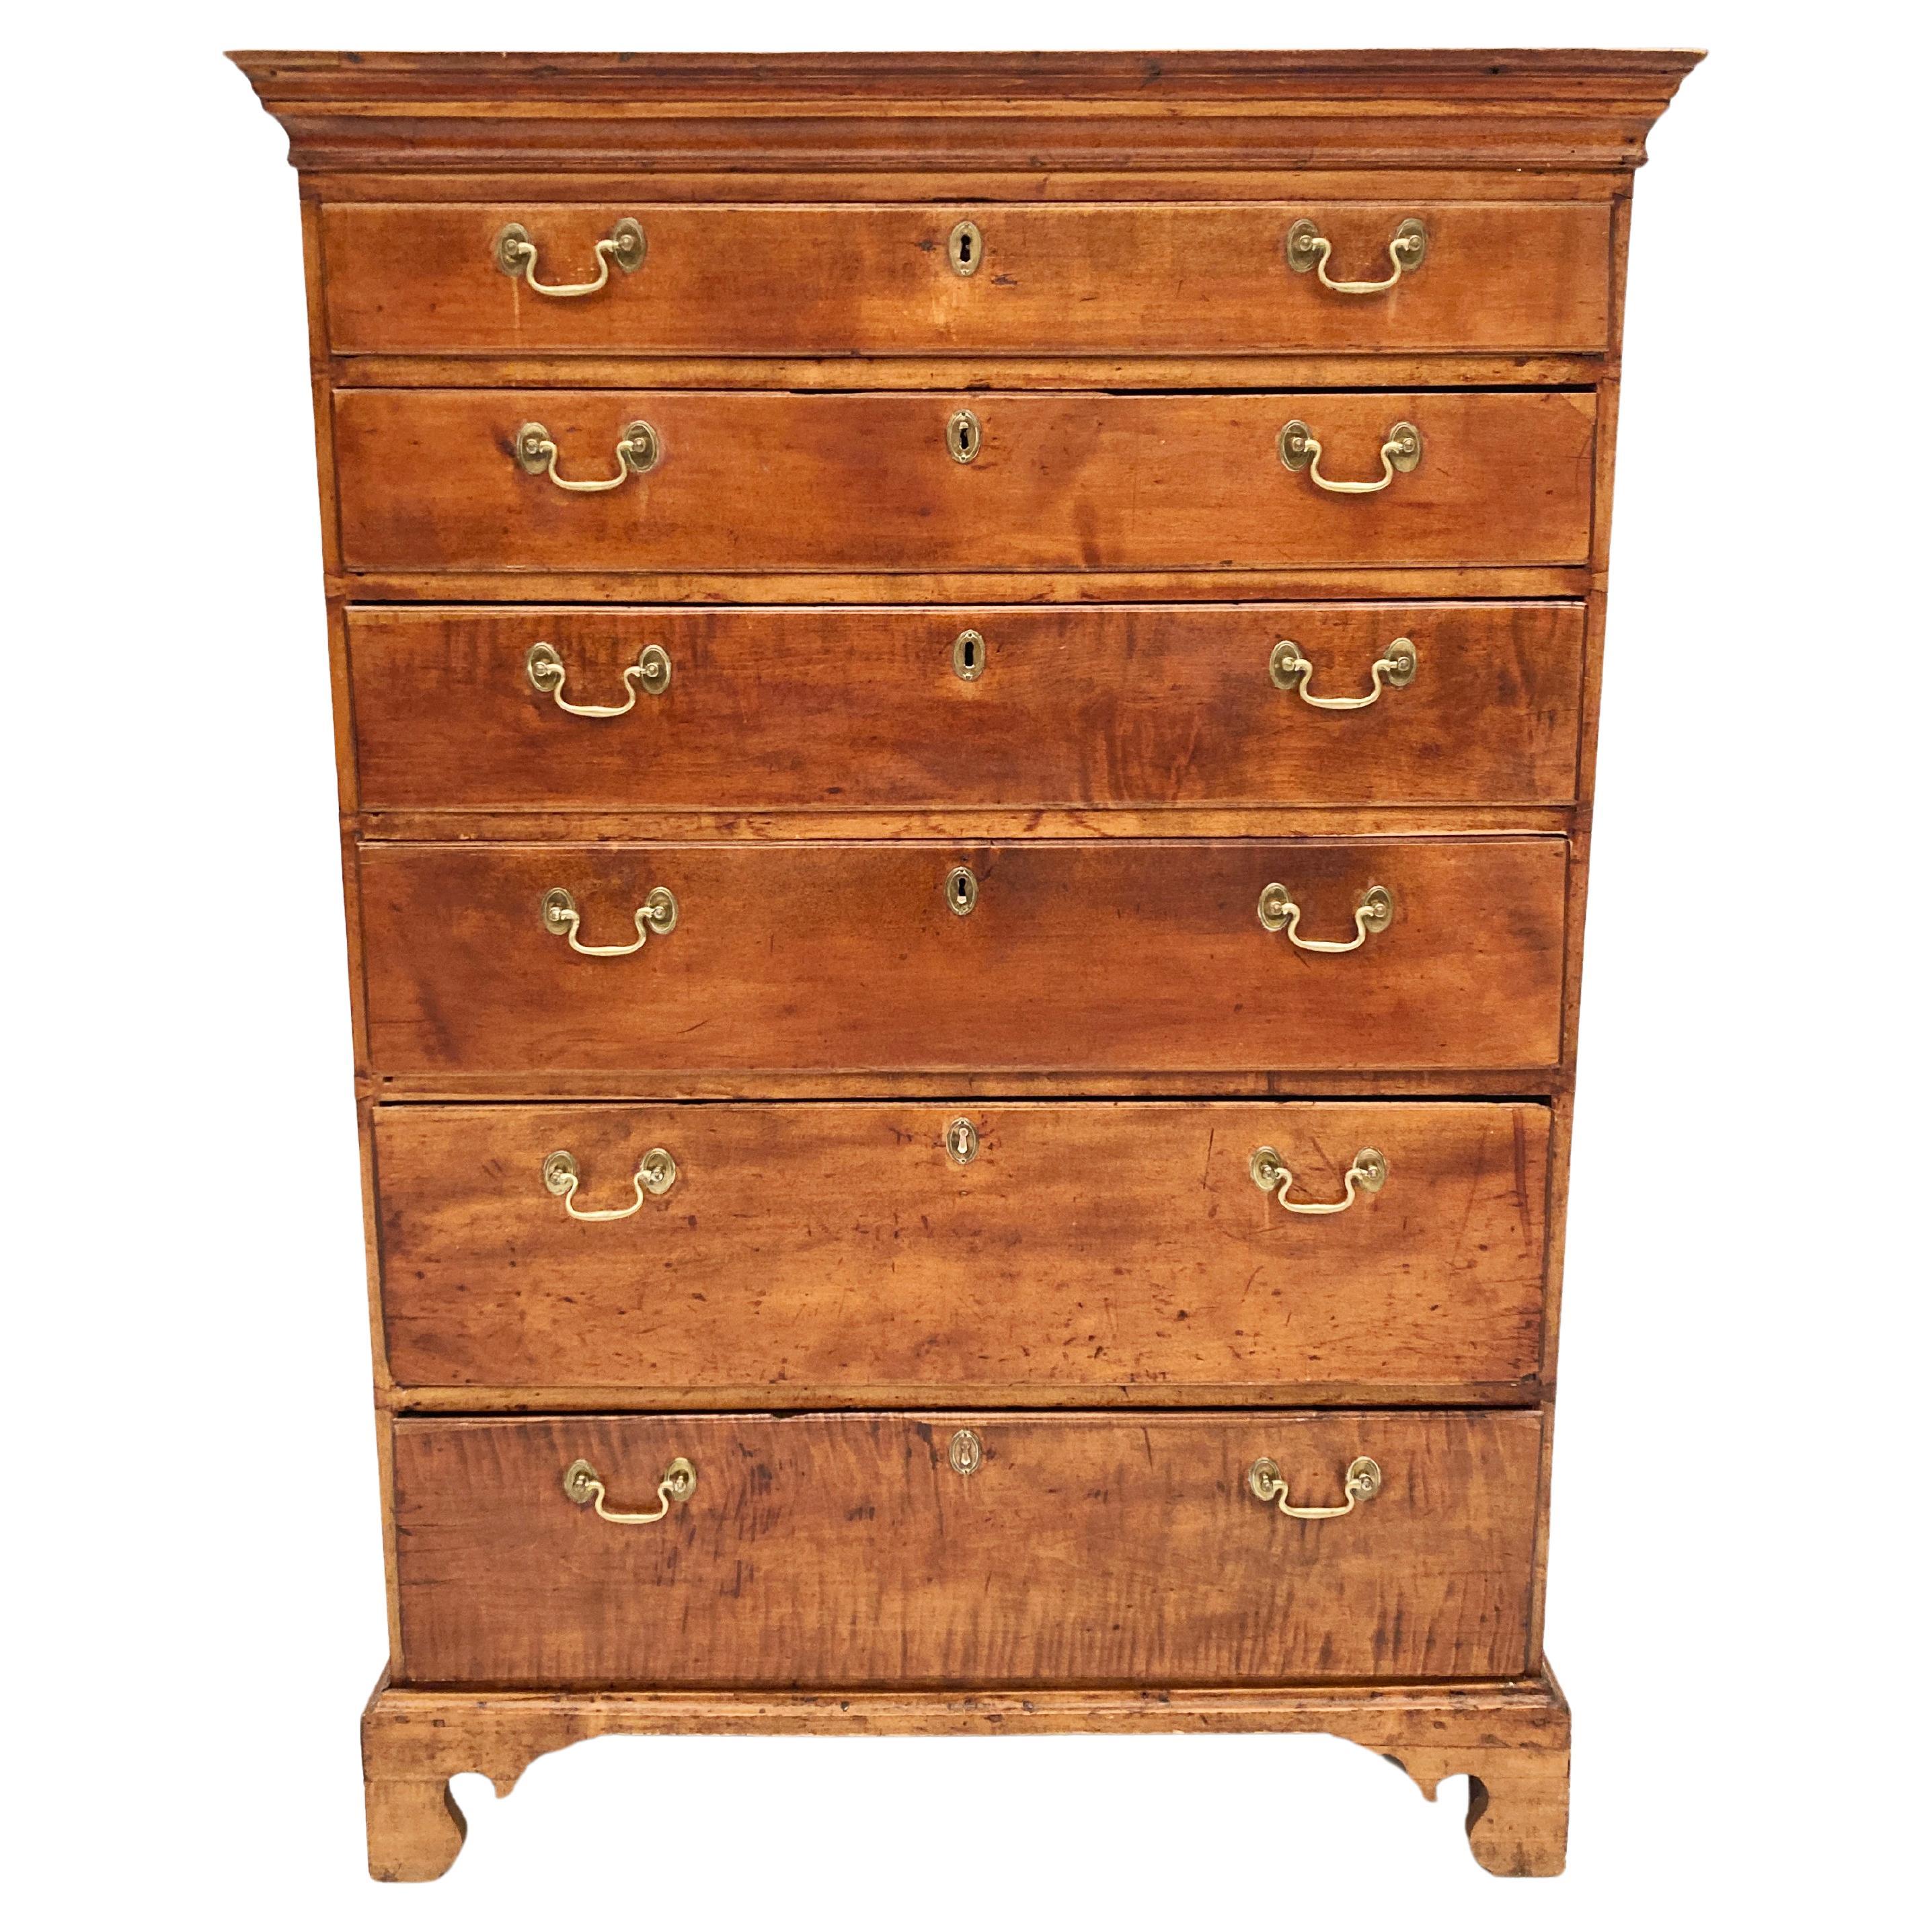 Early American 18th Century Chippendale Tiger Maple Tall Chest of Drawers